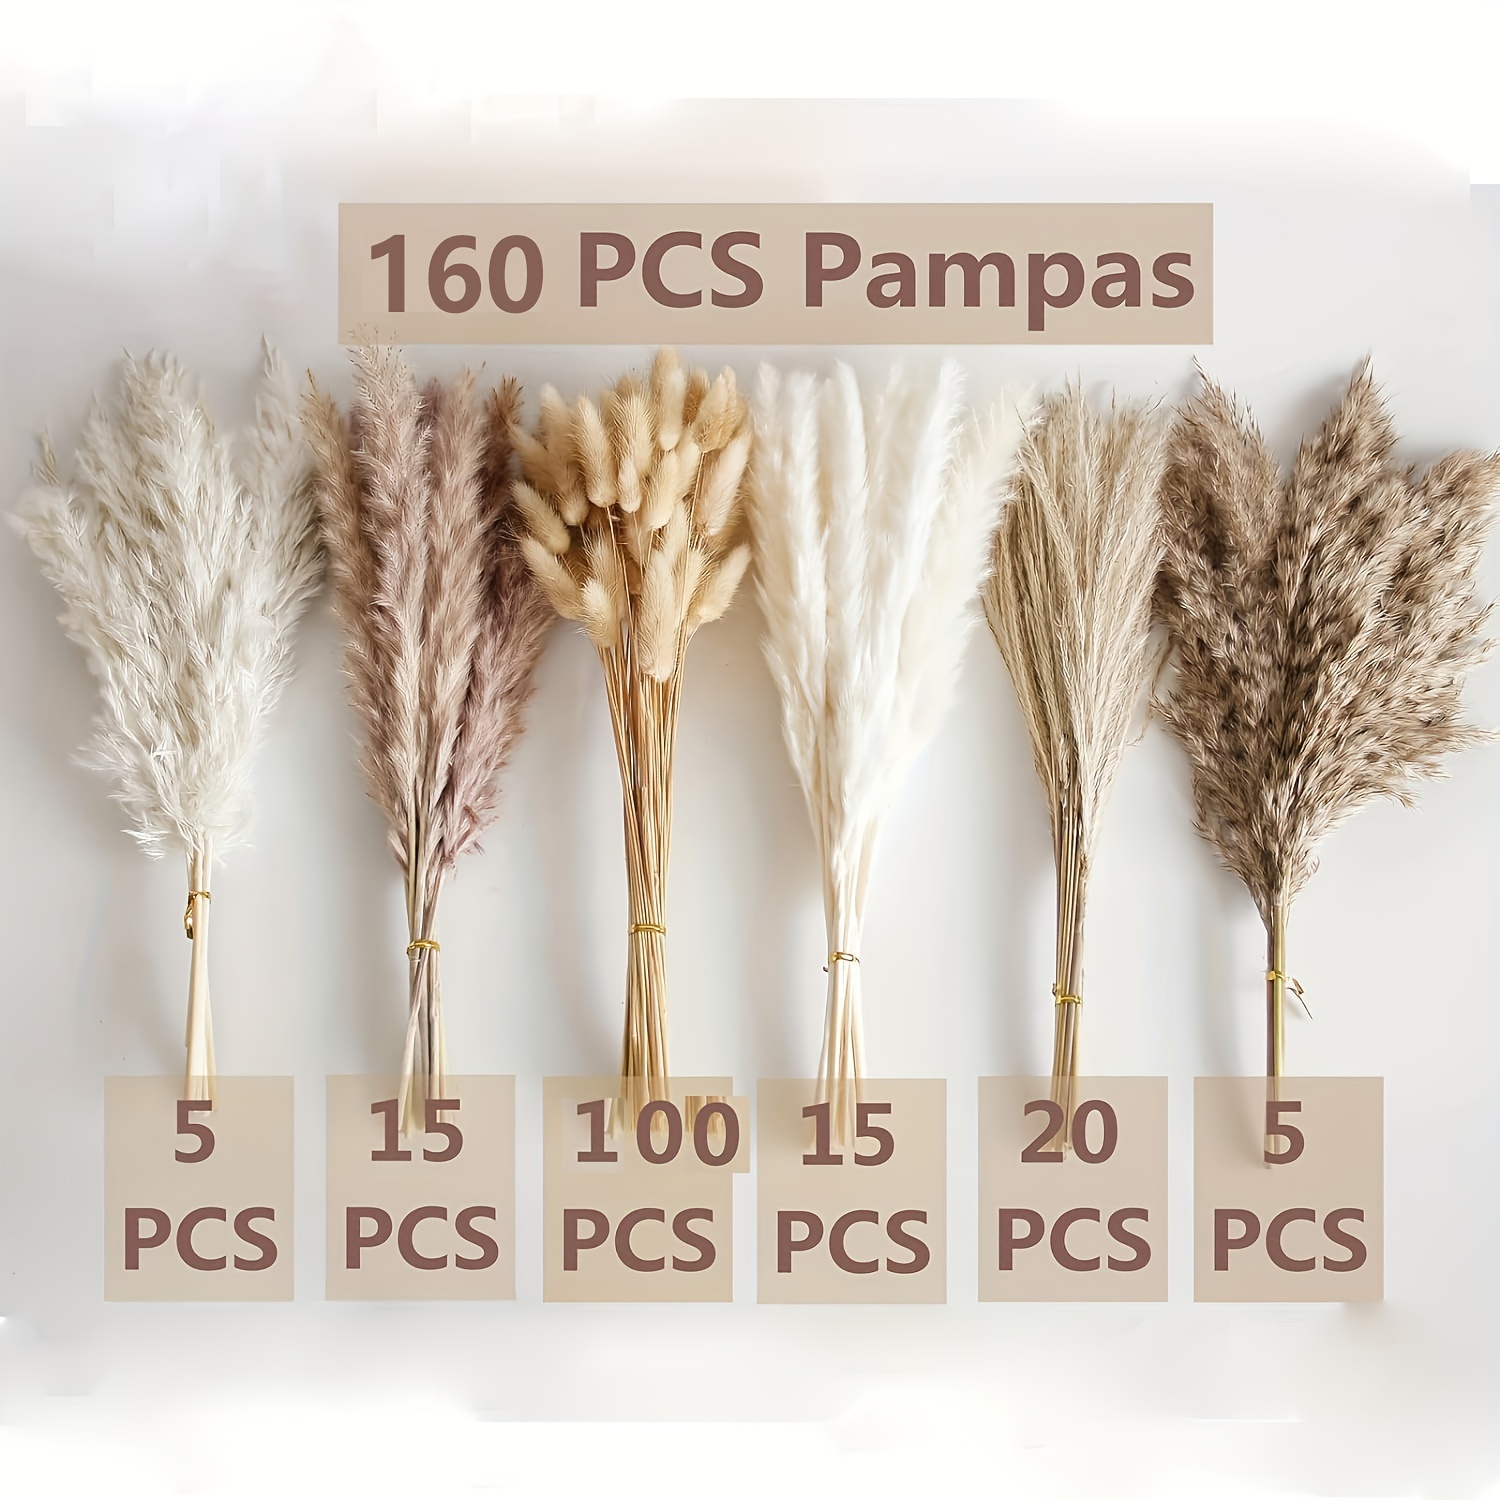 160pcs Dried Pampas Grass Decor, Carefully Hand-Picked Fluffy Reed Dried Flowers, Bouquet For Wedding Floral Arrangements Home Decorations Spring Wedding, Valentine's Day (It Has Been Processed And Poses No Pest Risk)